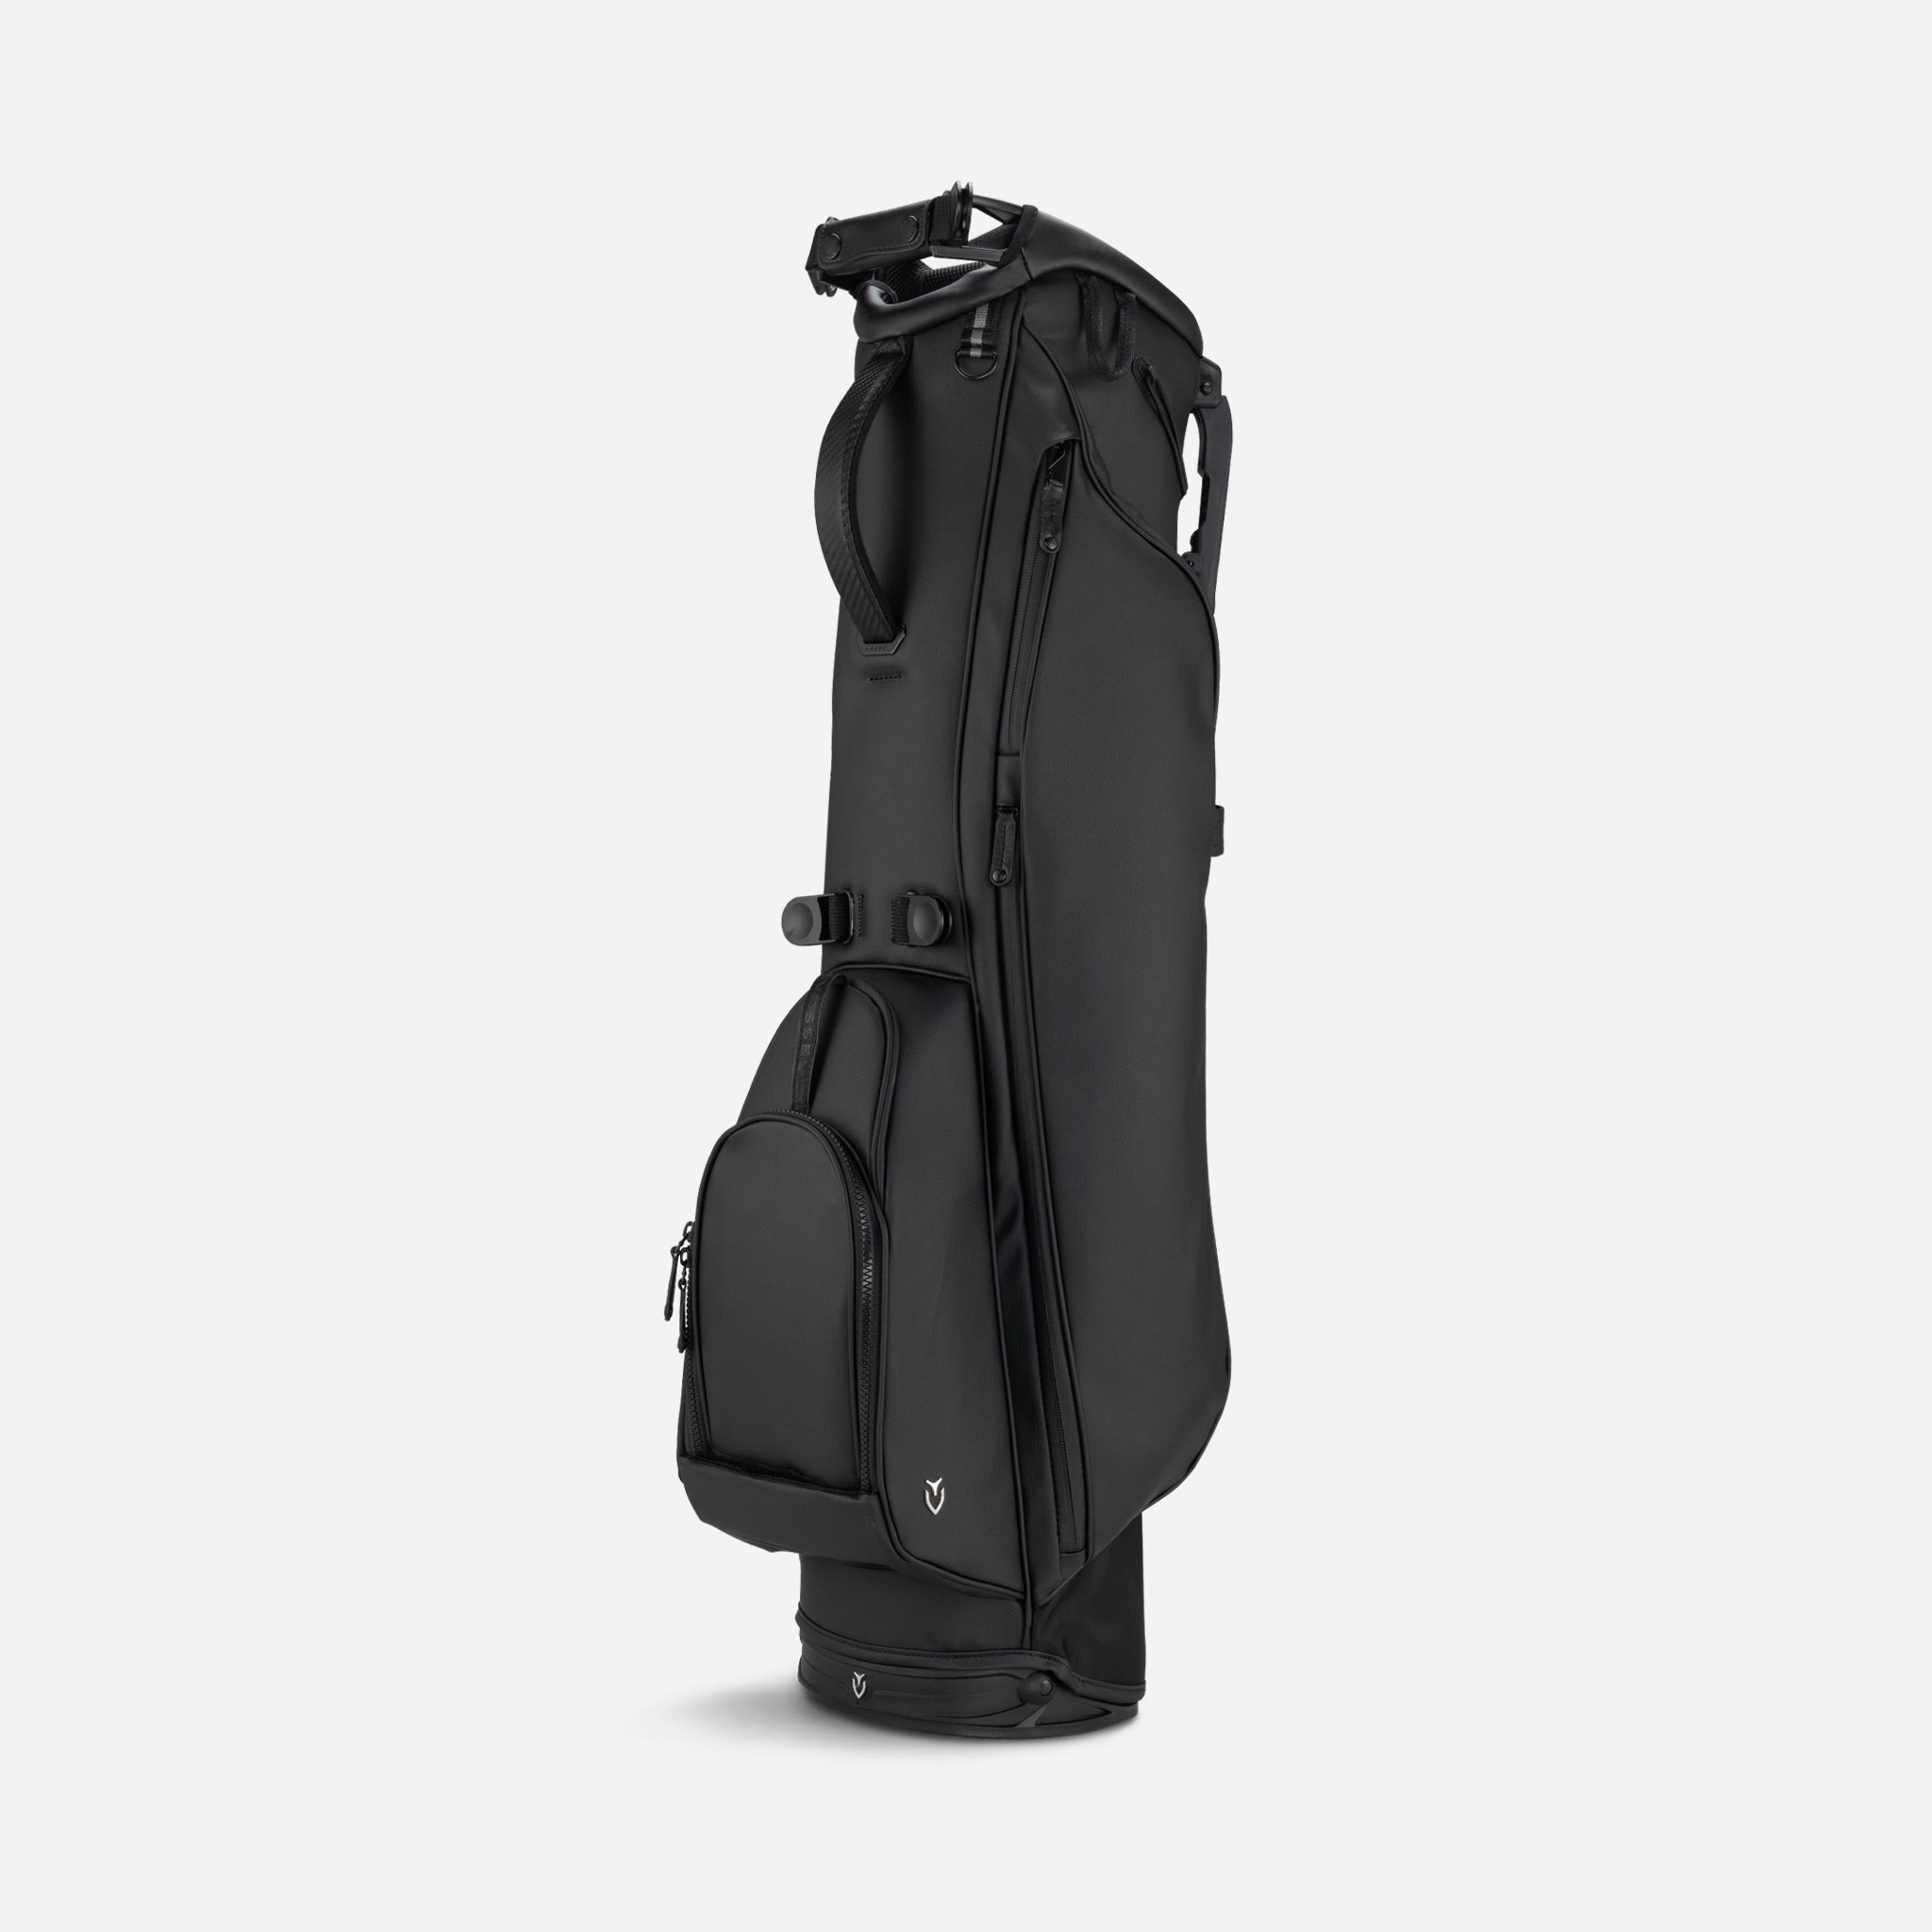 Discount Golf Bags, Golf Bags at Closeout Prices